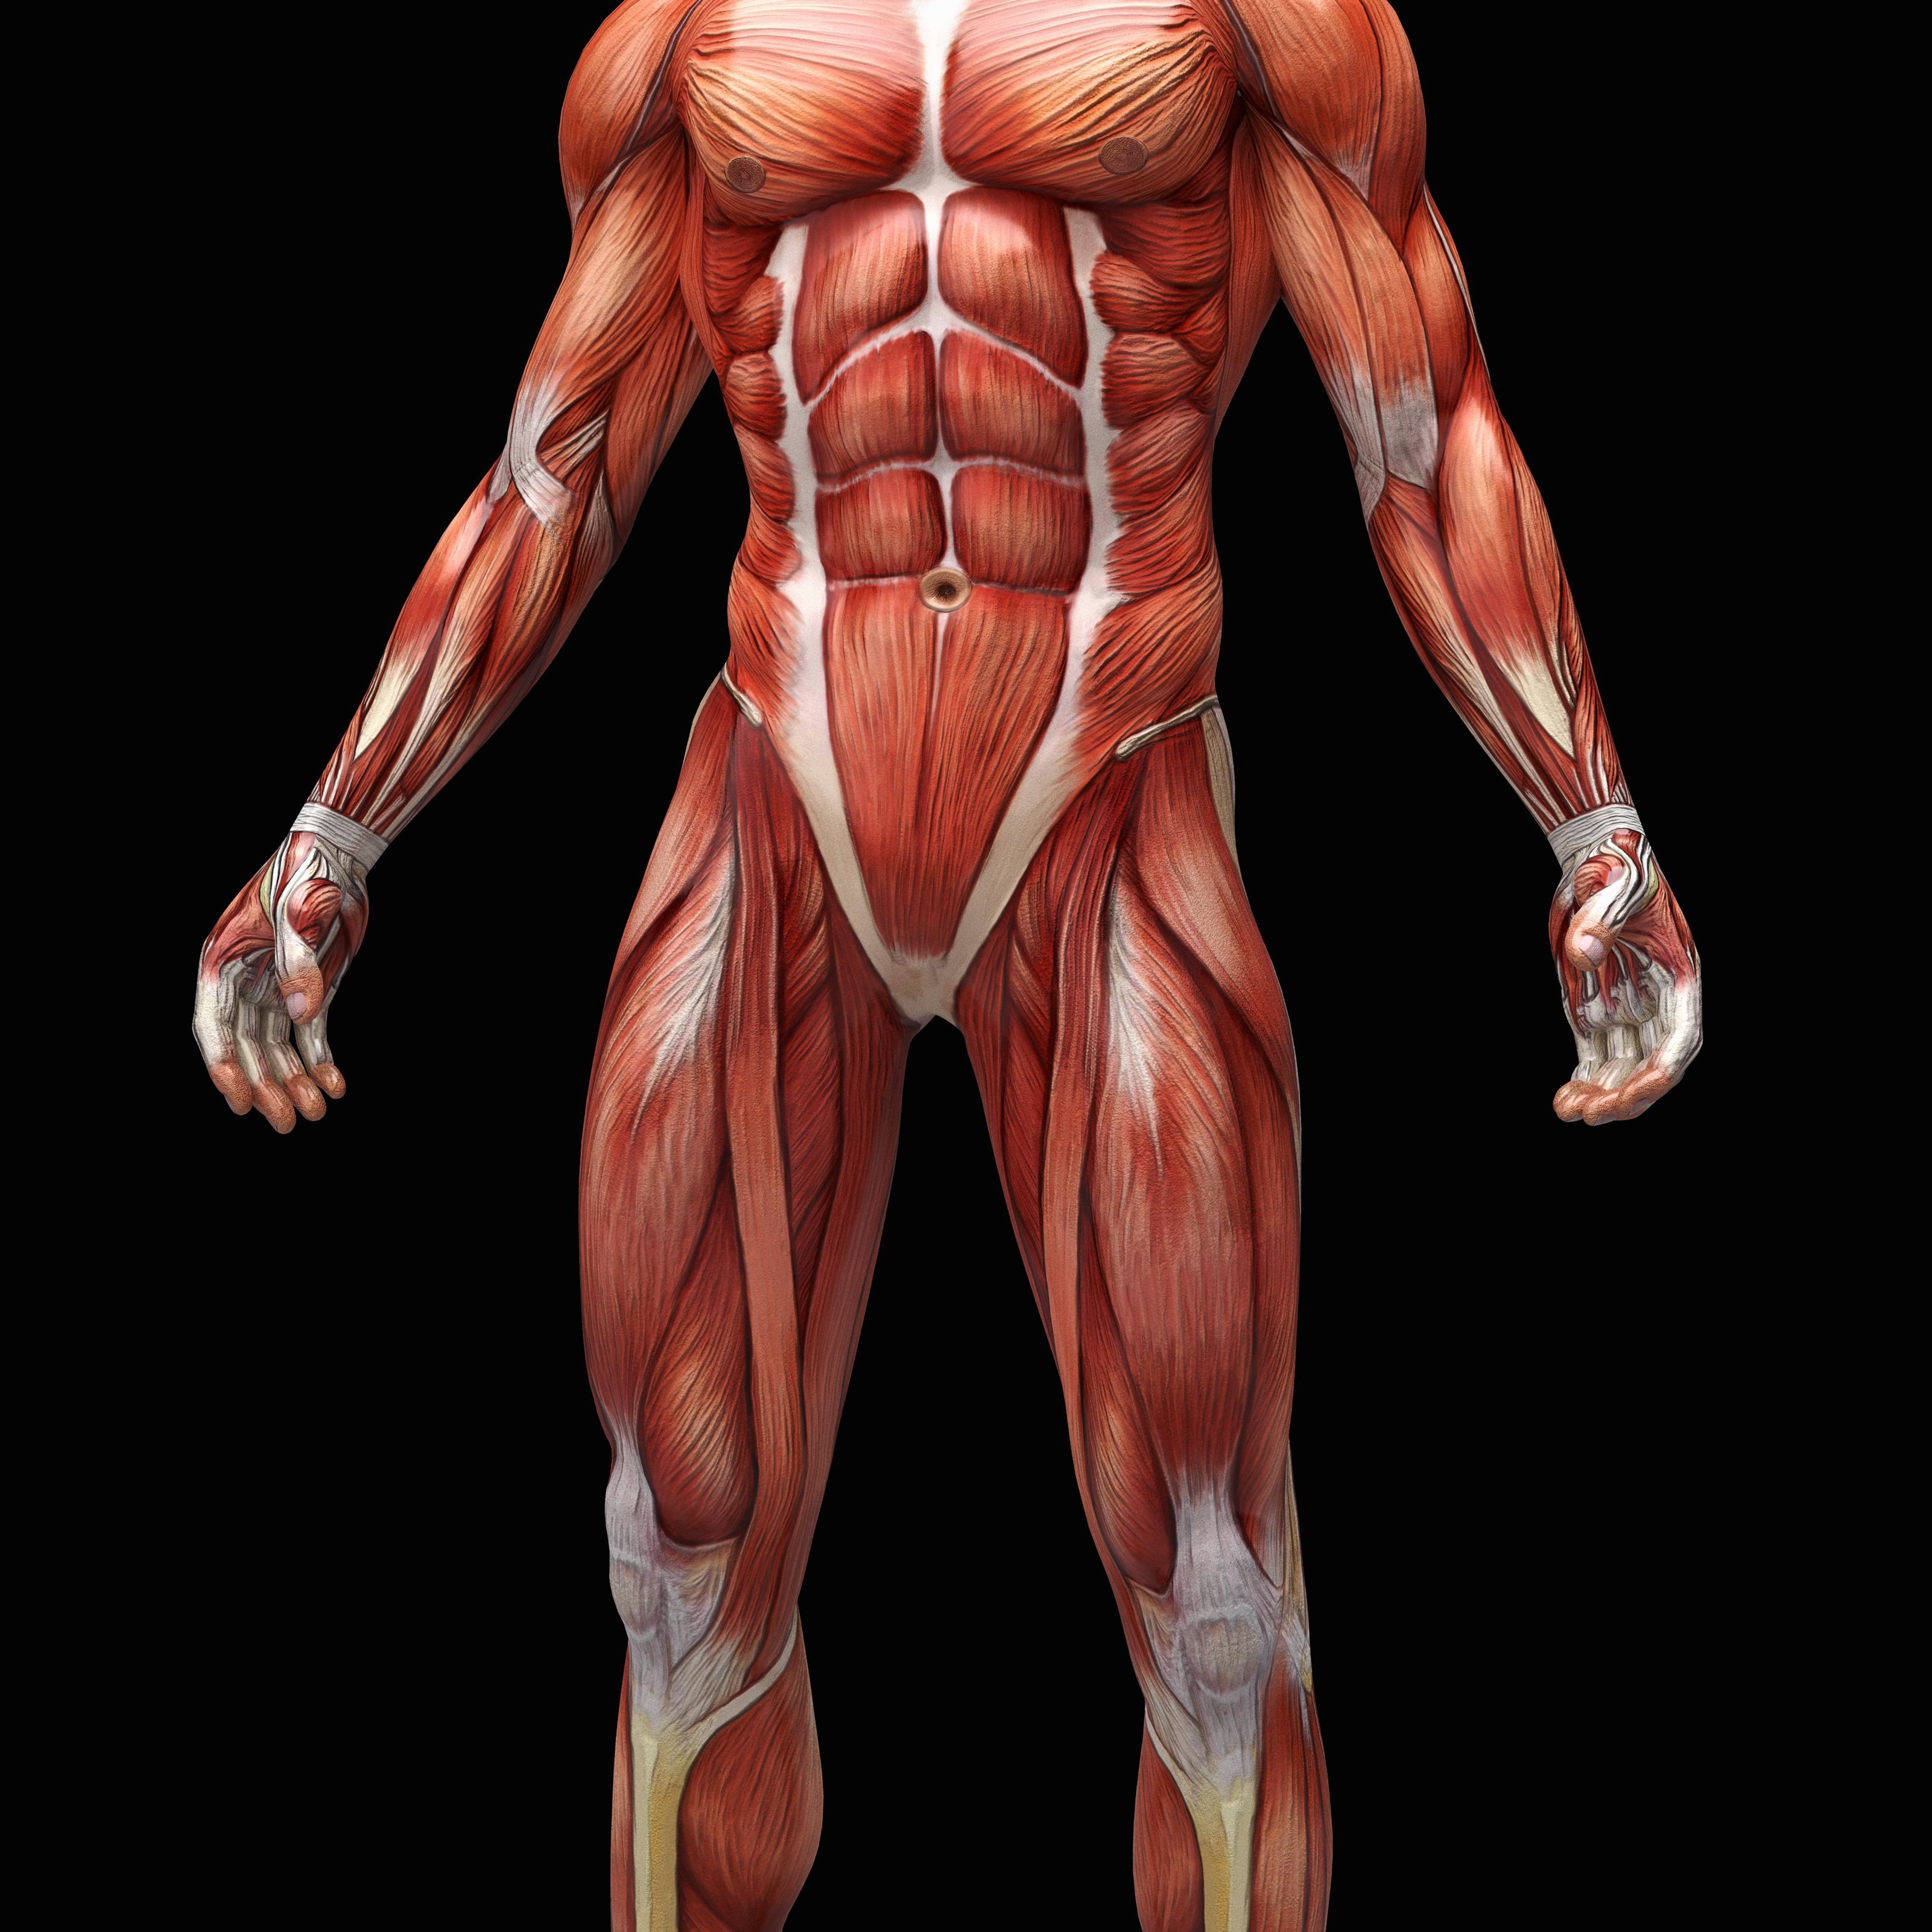 Learn About the Organ Systems in the Human Body